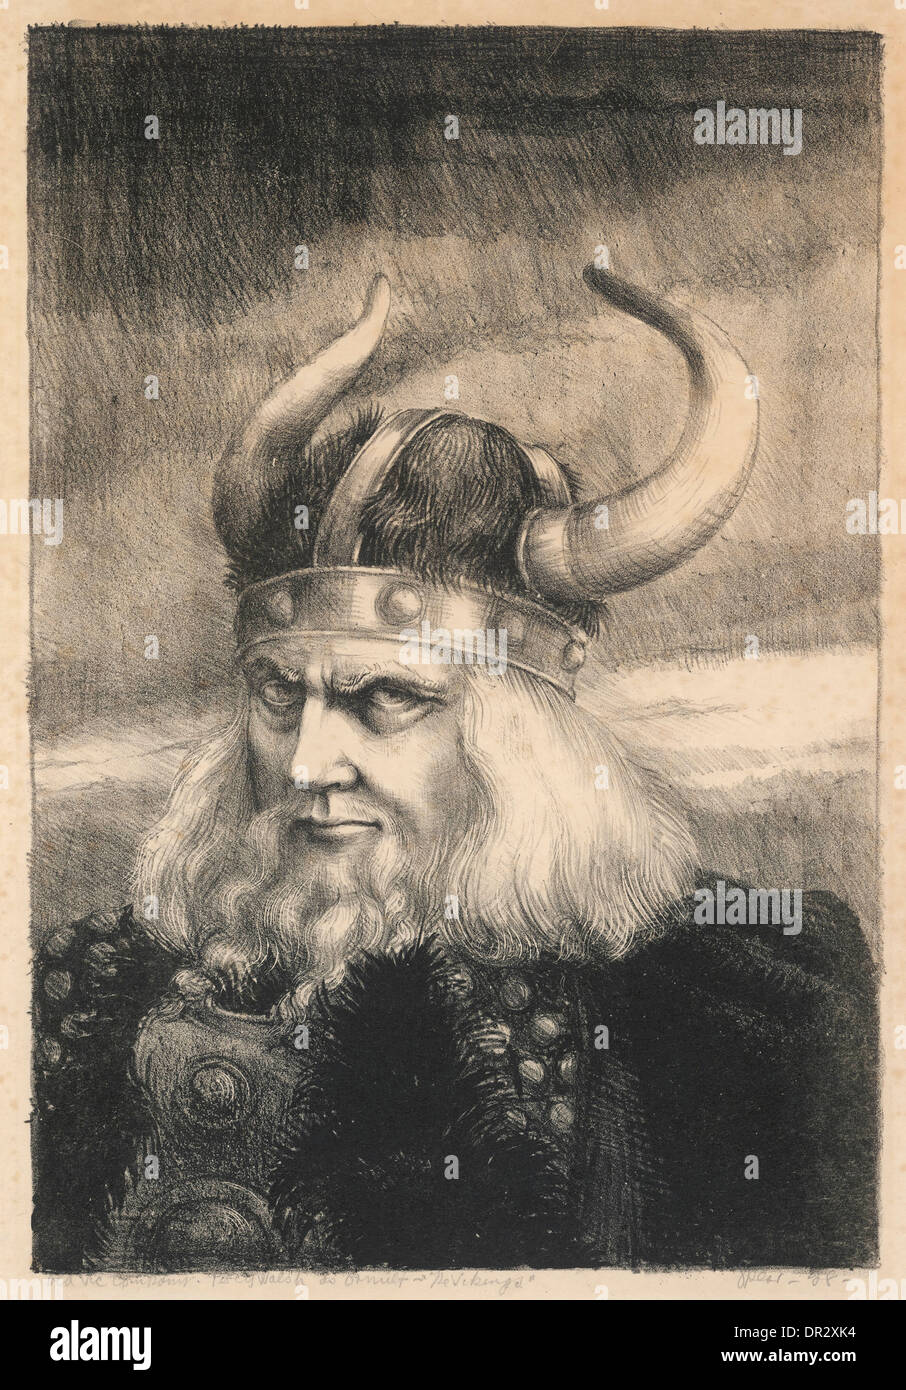 Viking Warrior High Resolution Stock Photography and Images - Alamy